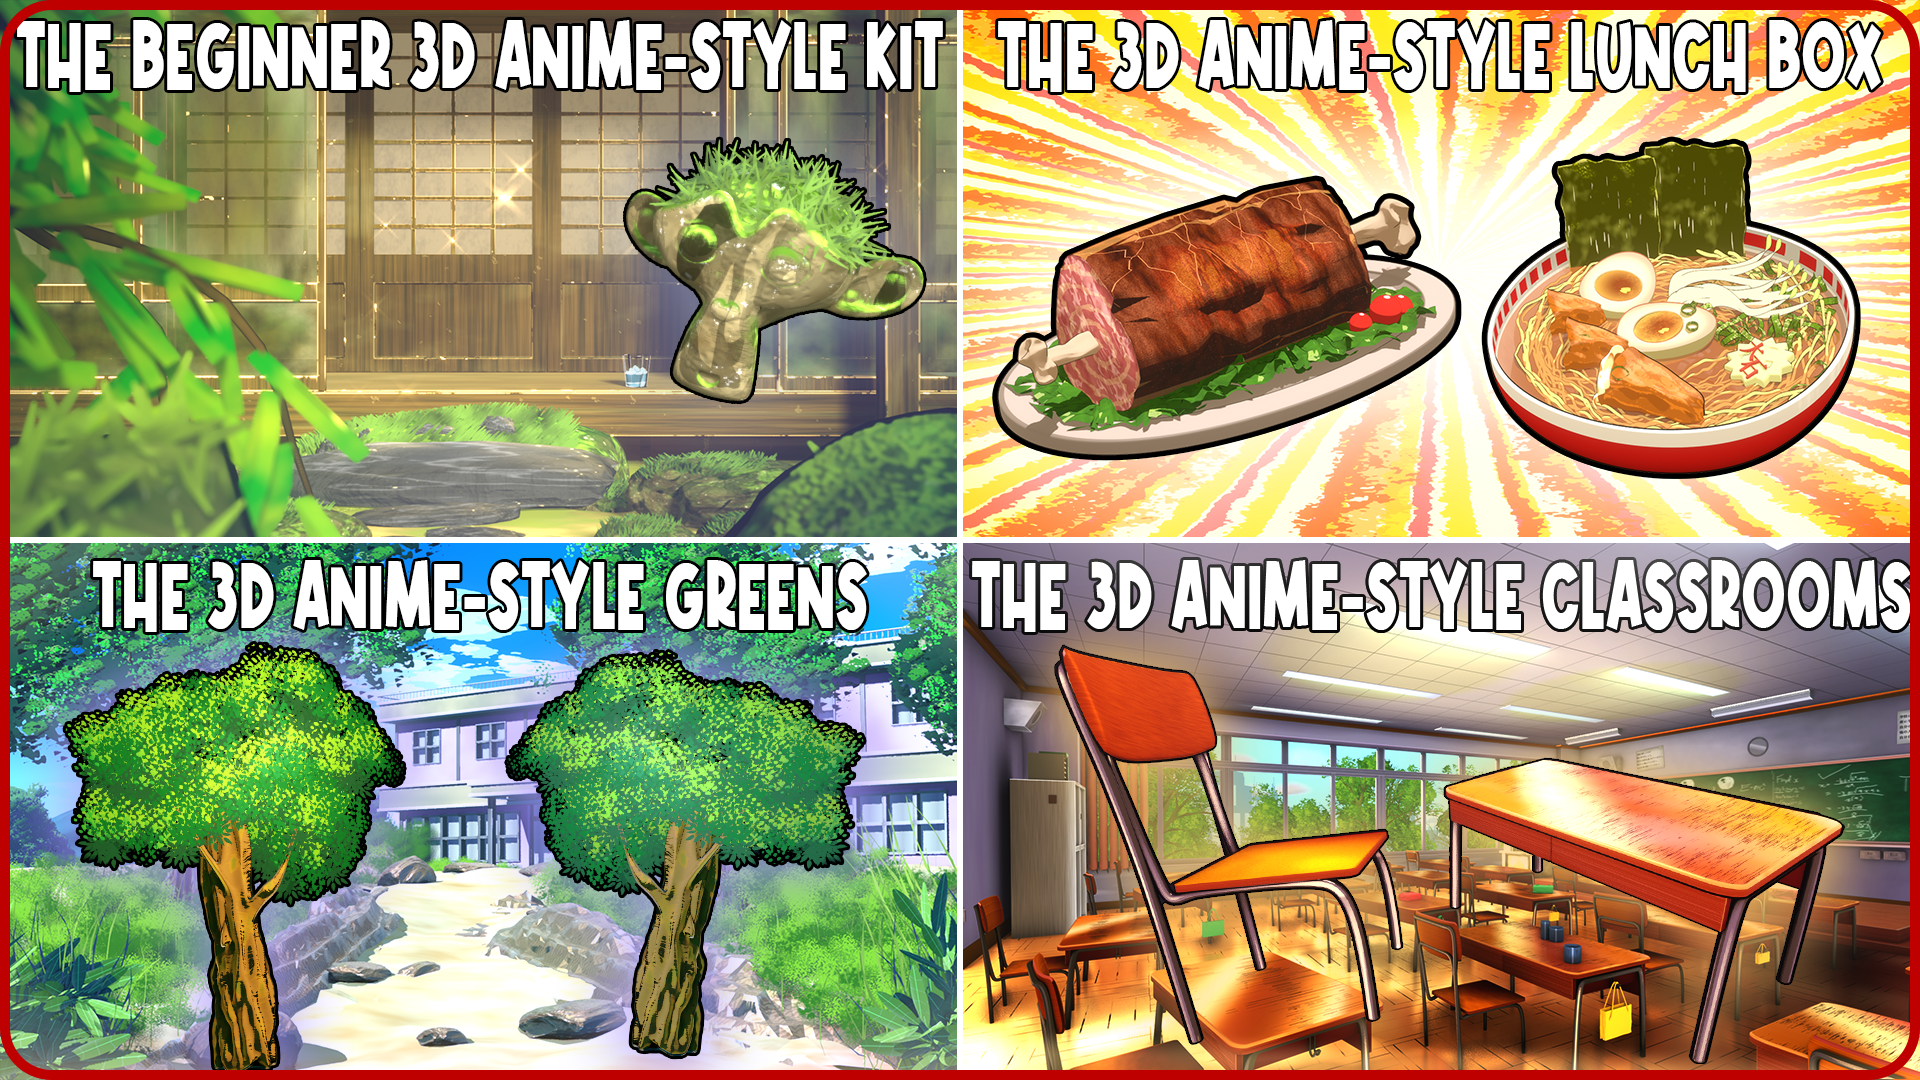 The Ultimate 3D Anime-Style Bundle